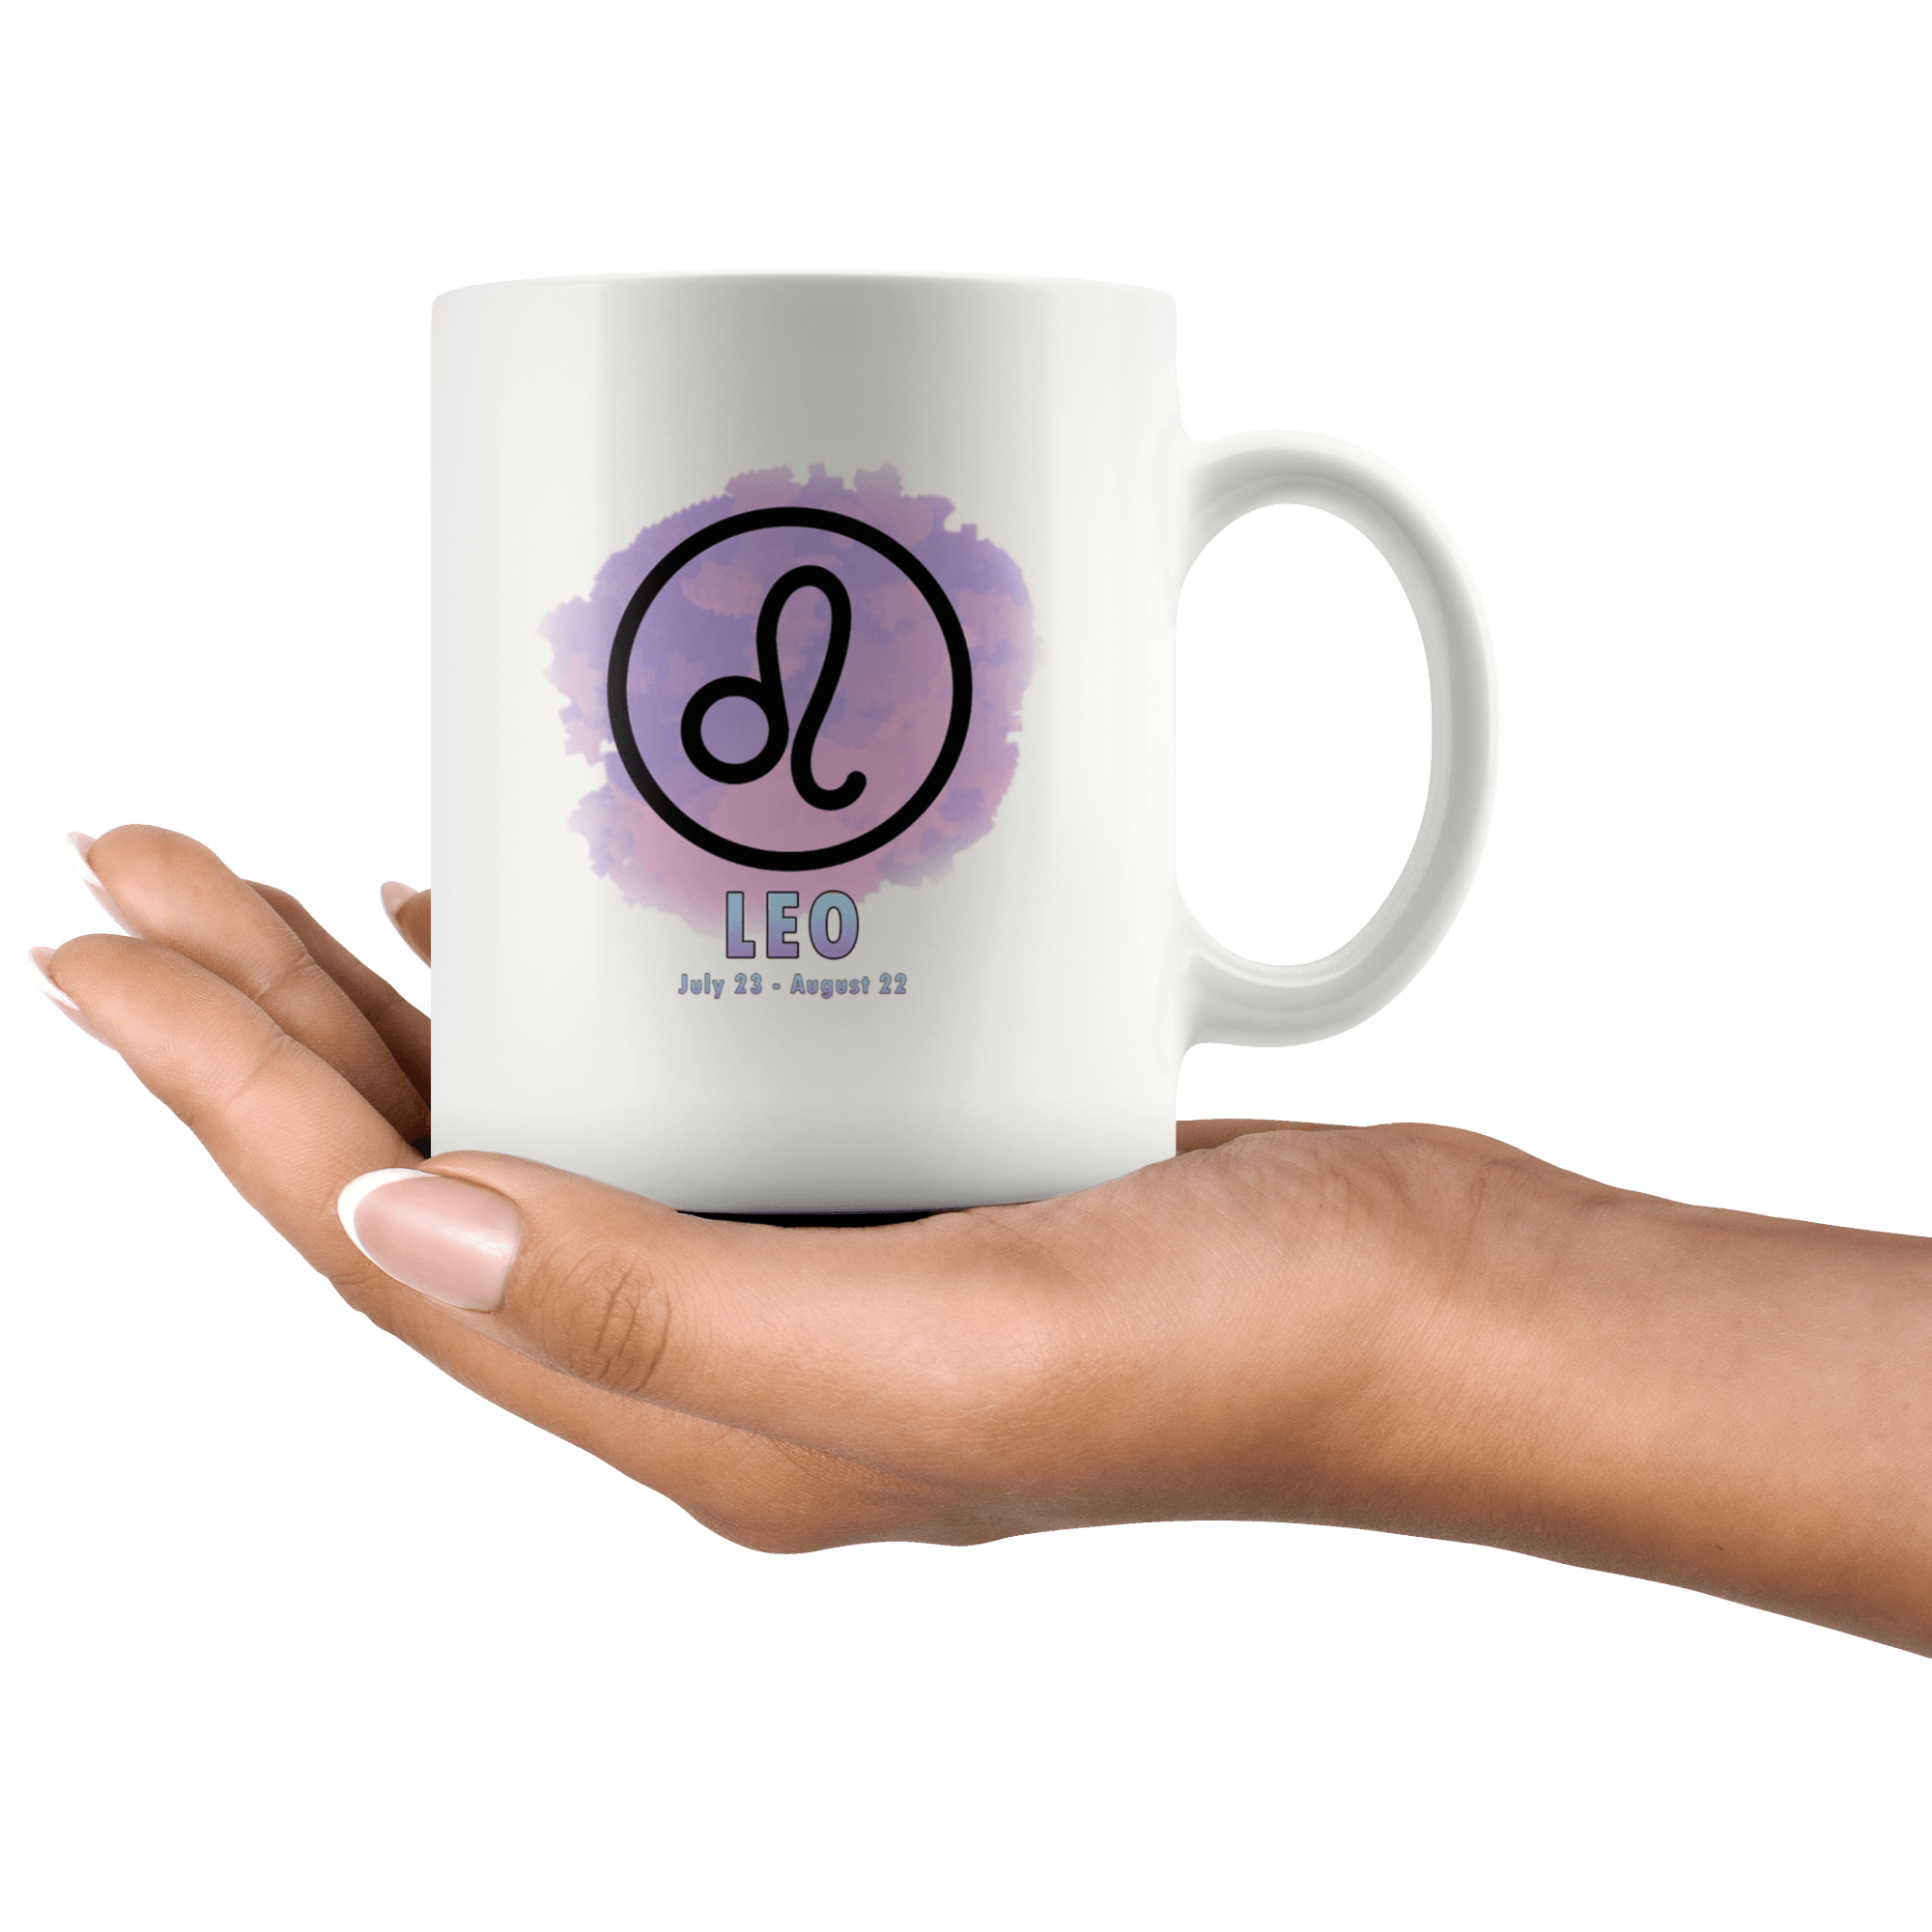 Leo Coffee Mug - Leo Constellation Coffee Cup - Zodiac Gifts For Horoscope Lover Born in July or August - SPCM